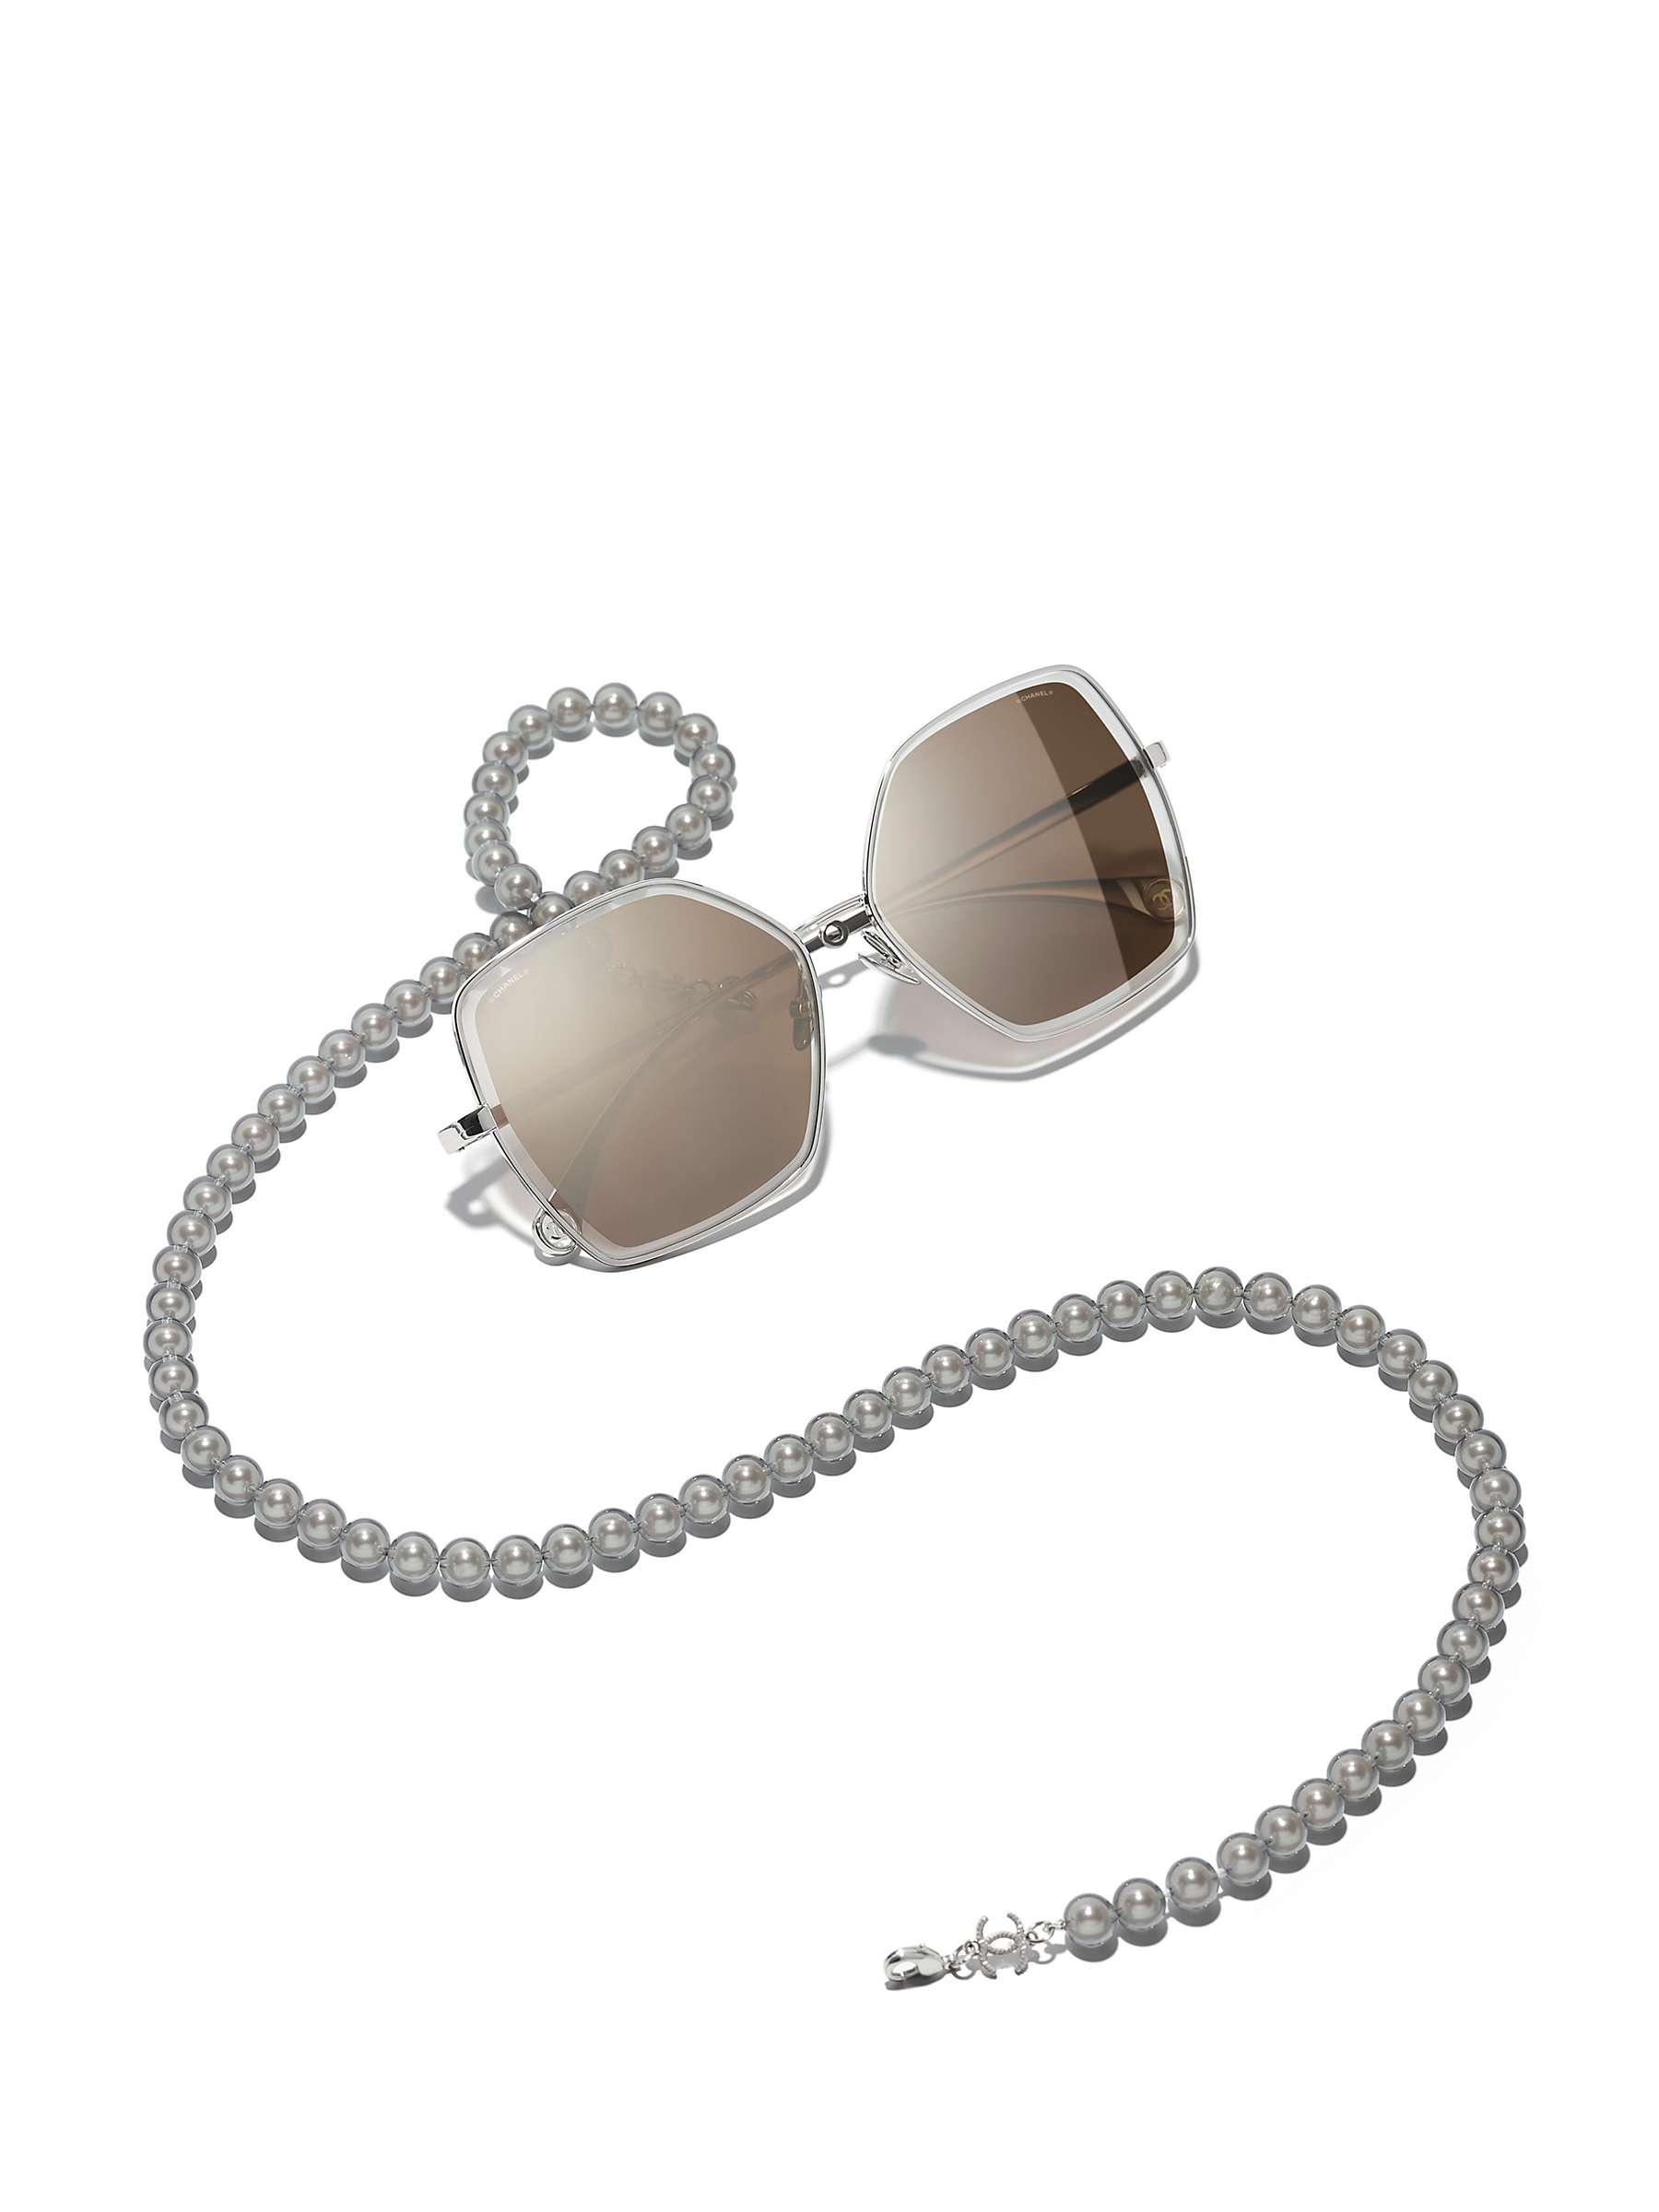 Buy CHANEL Pilot Sunglasses CH4262 Silver/Mirror Brown Online at johnlewis.com